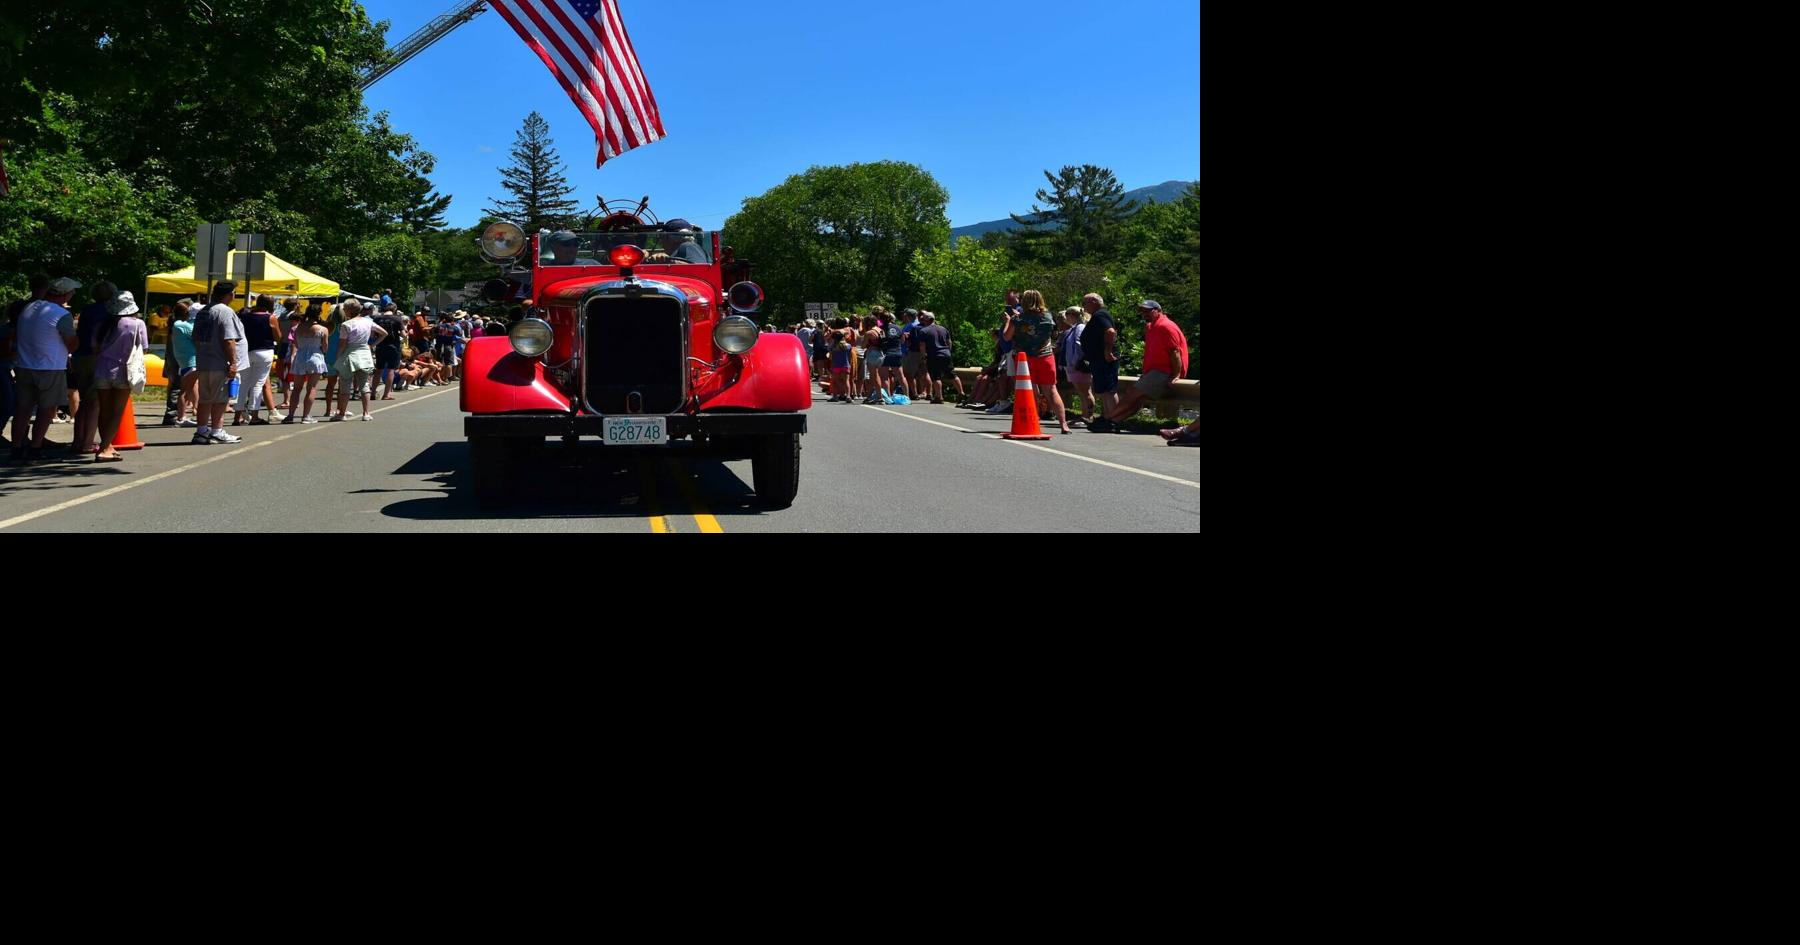 Franconia Old Home Day Honors Town Firefighter, Past And Present